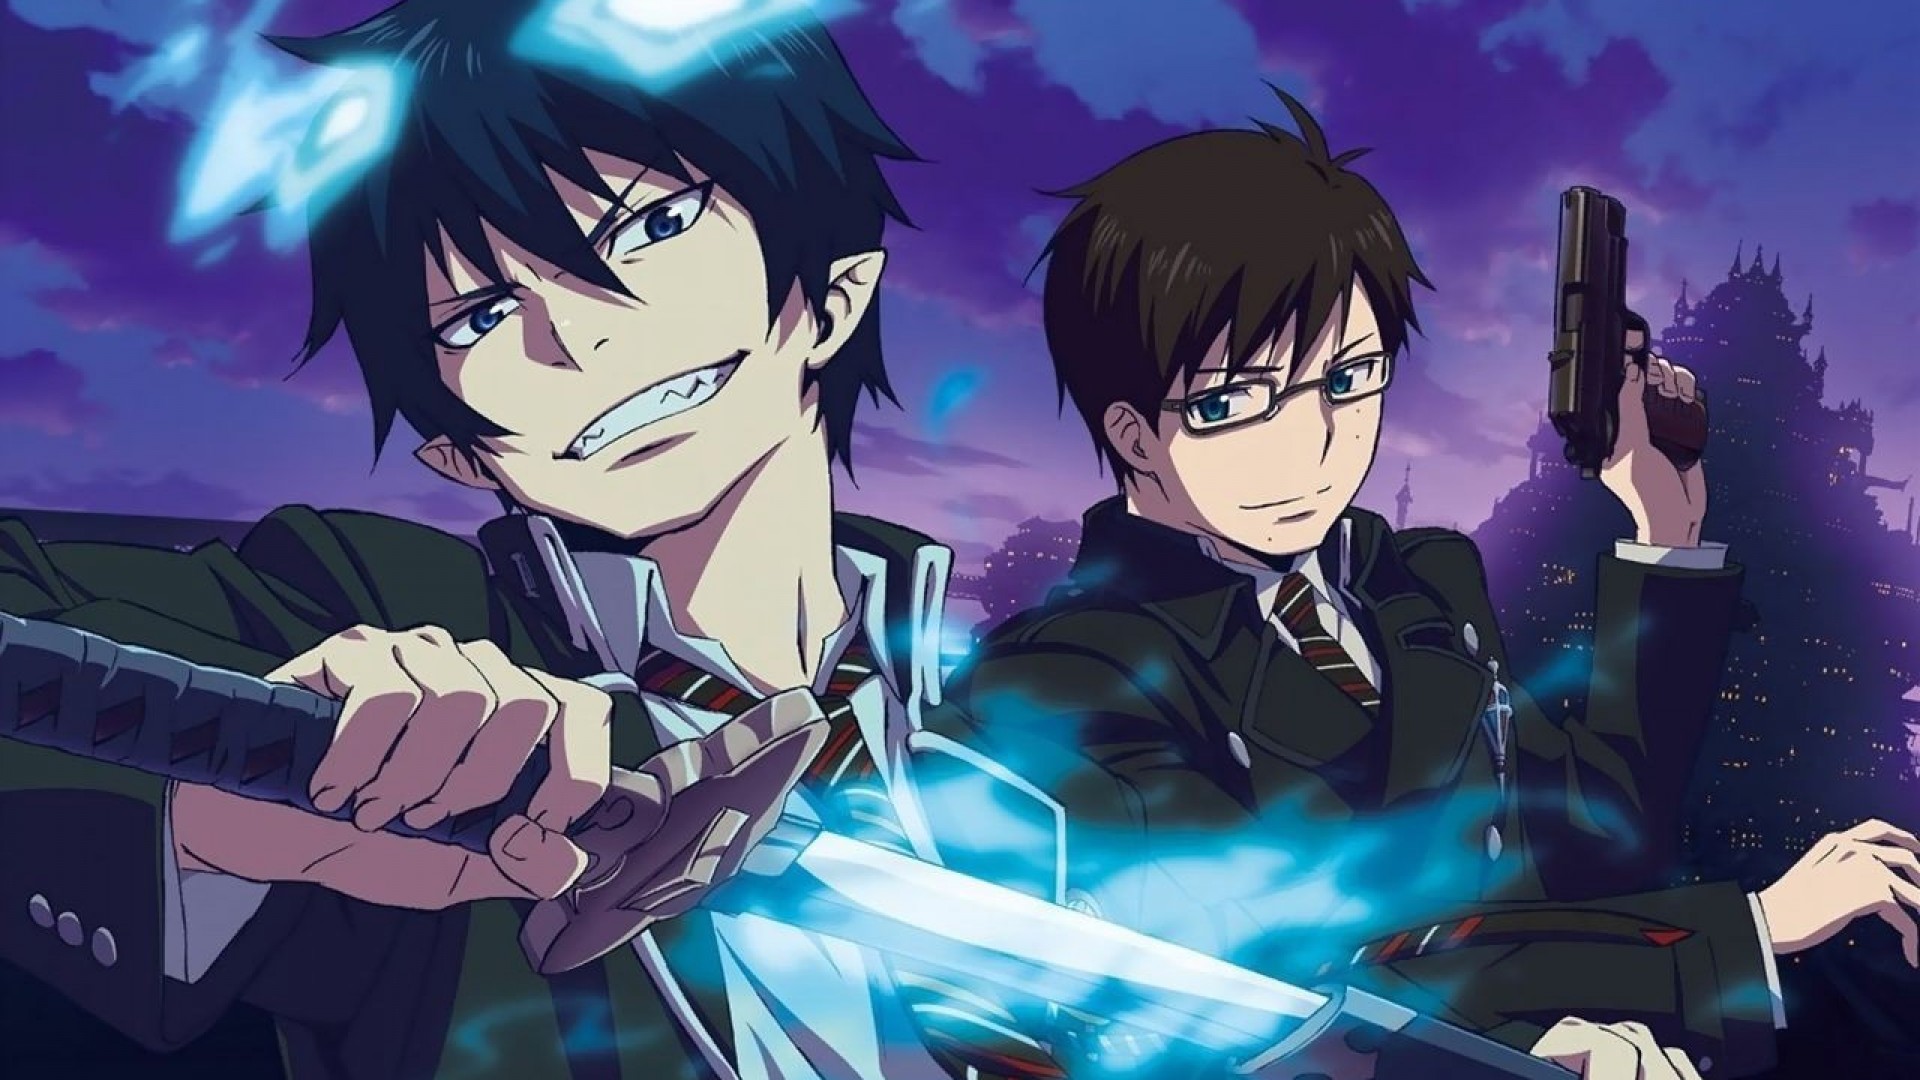 3. Rin Okumura from Blue Exorcist - wide 2